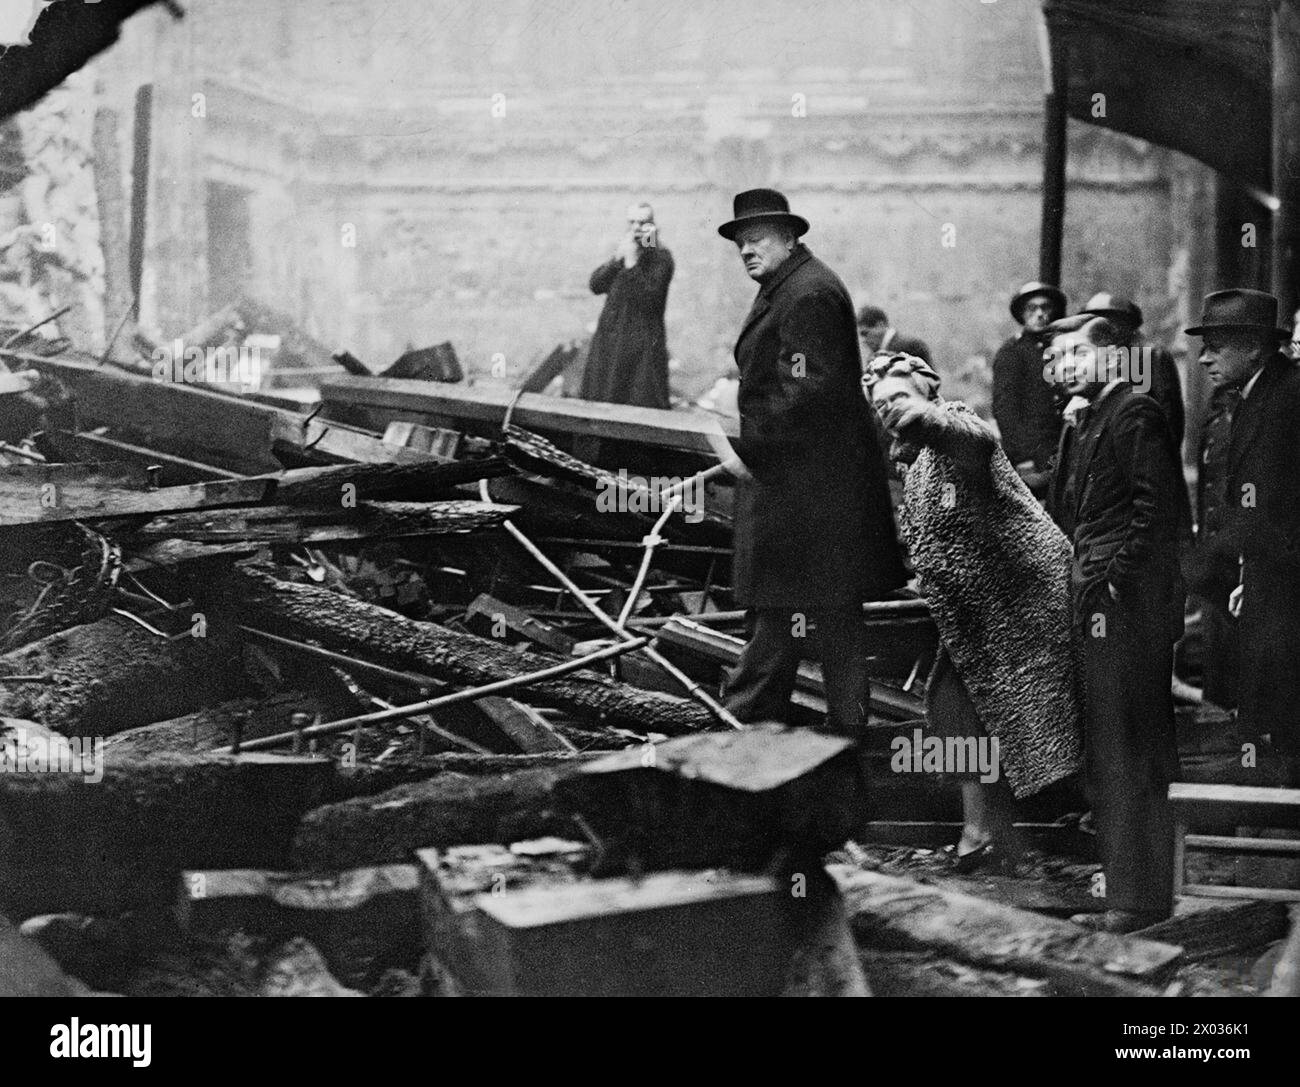 WINSTON AND MRS CHURCHILL IN GUILDHALL - Winston and Mrs Churchill tour the smoking remains of the Guildhall following a night of German bombing of the City of London, December 1940 Stock Photo